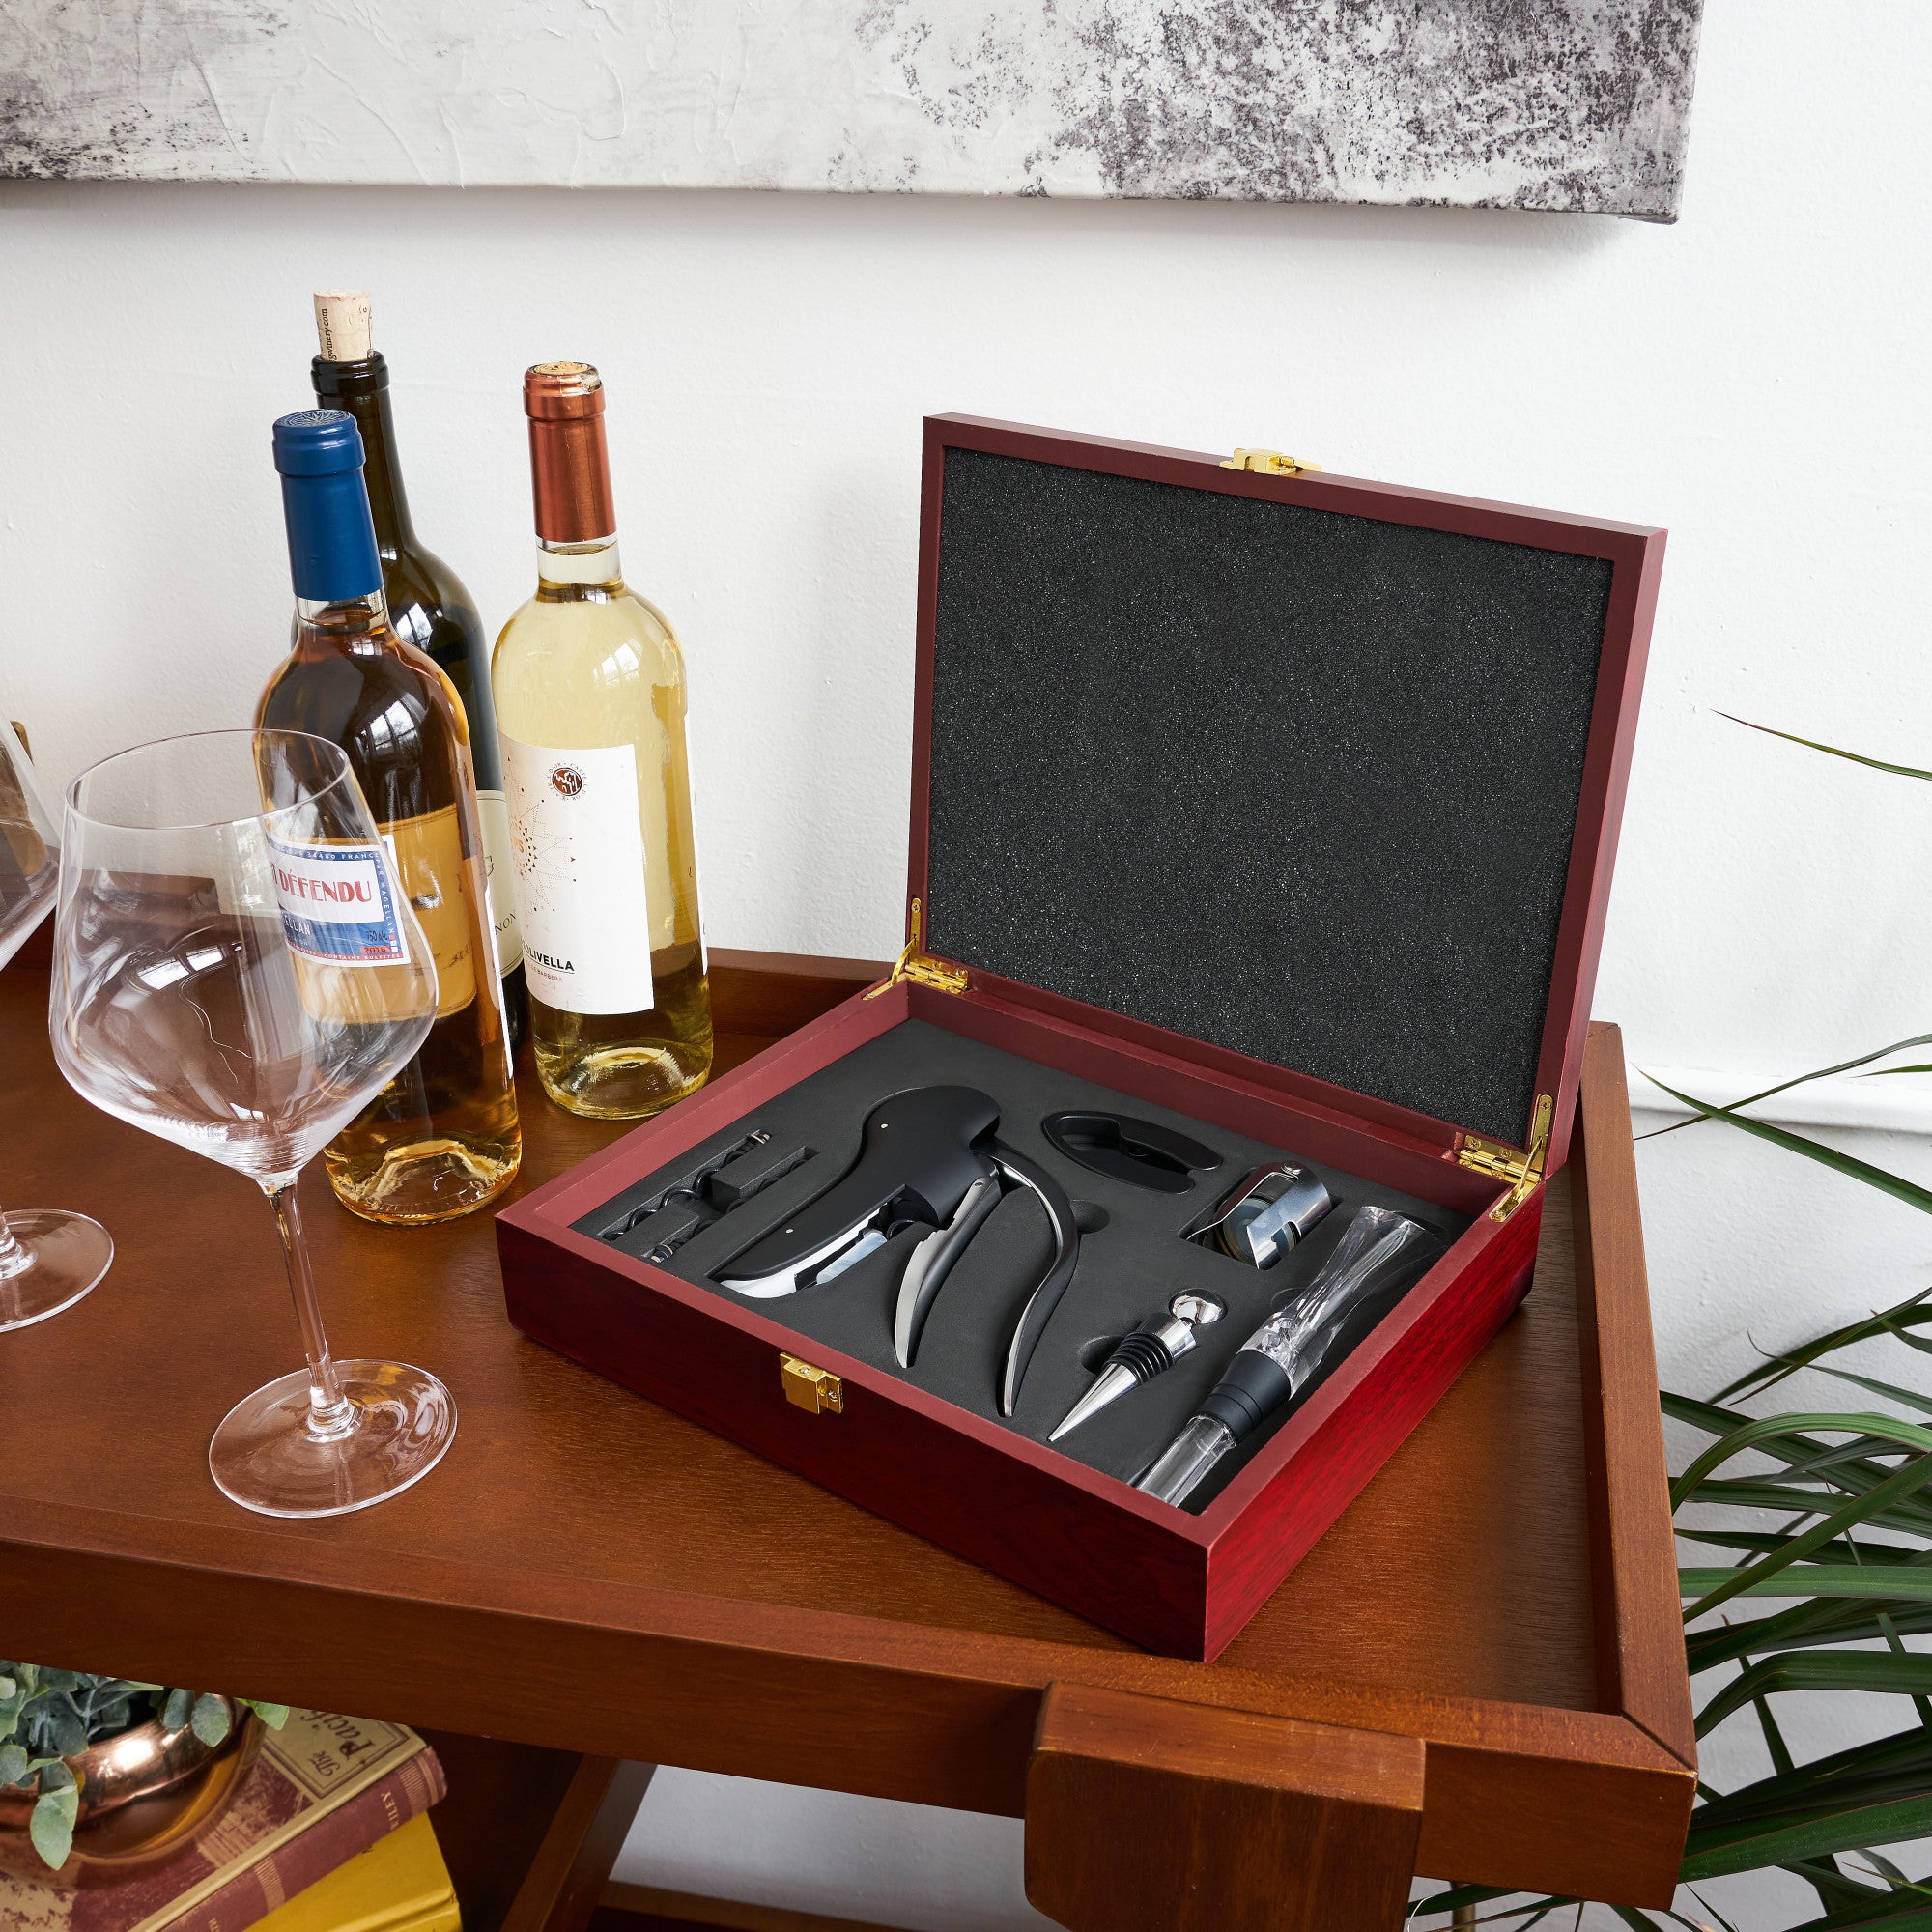 5 Piece Wine Tools Boxed Set by True (10680)